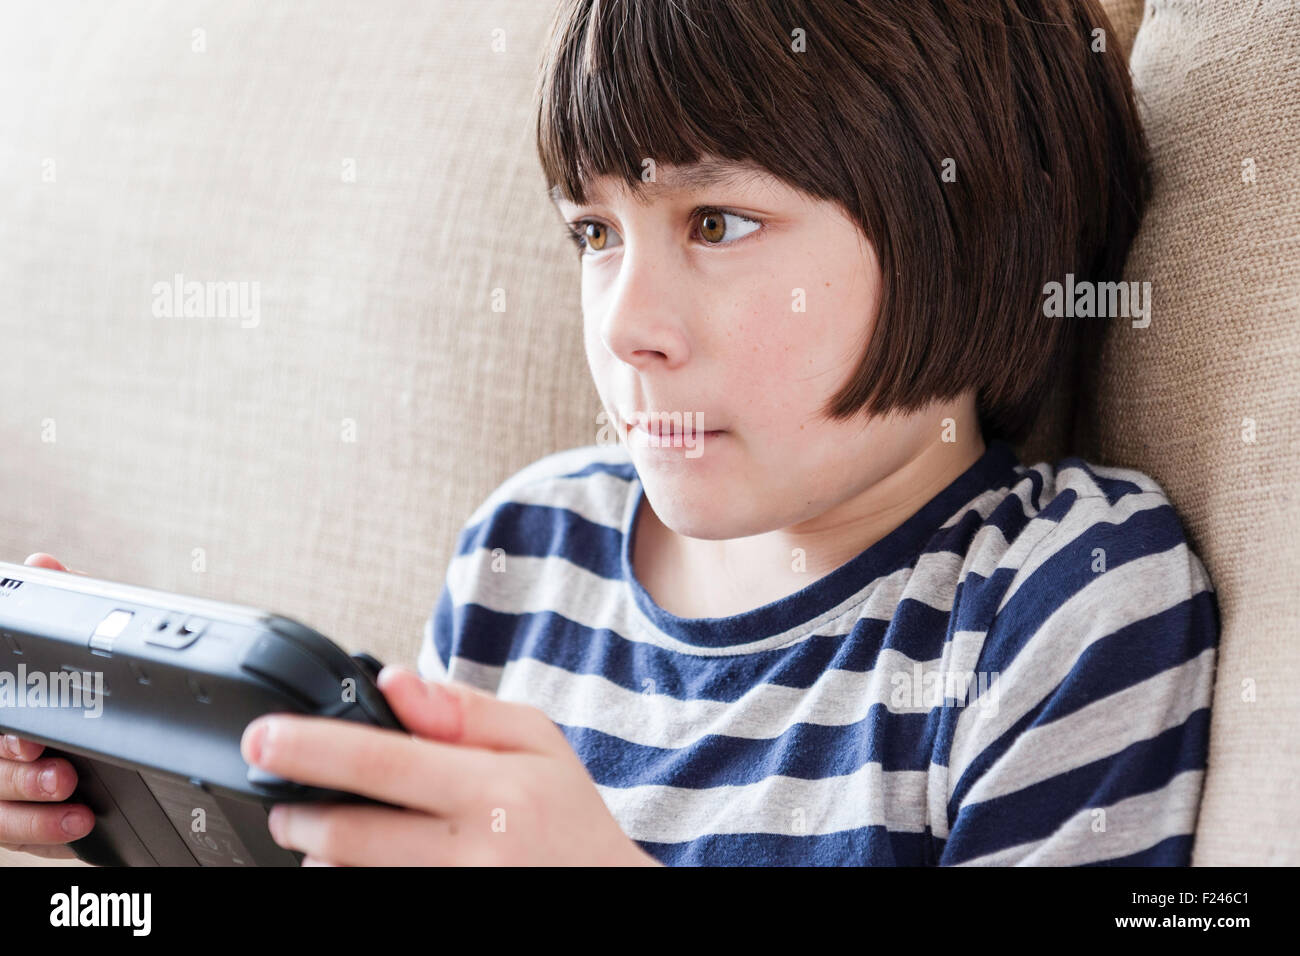 Male Caucasian child, boy, 10-12 year old, sitting holding a  Nintendo wii game console in both hands concentrating, head and shoulder side view. Stock Photo